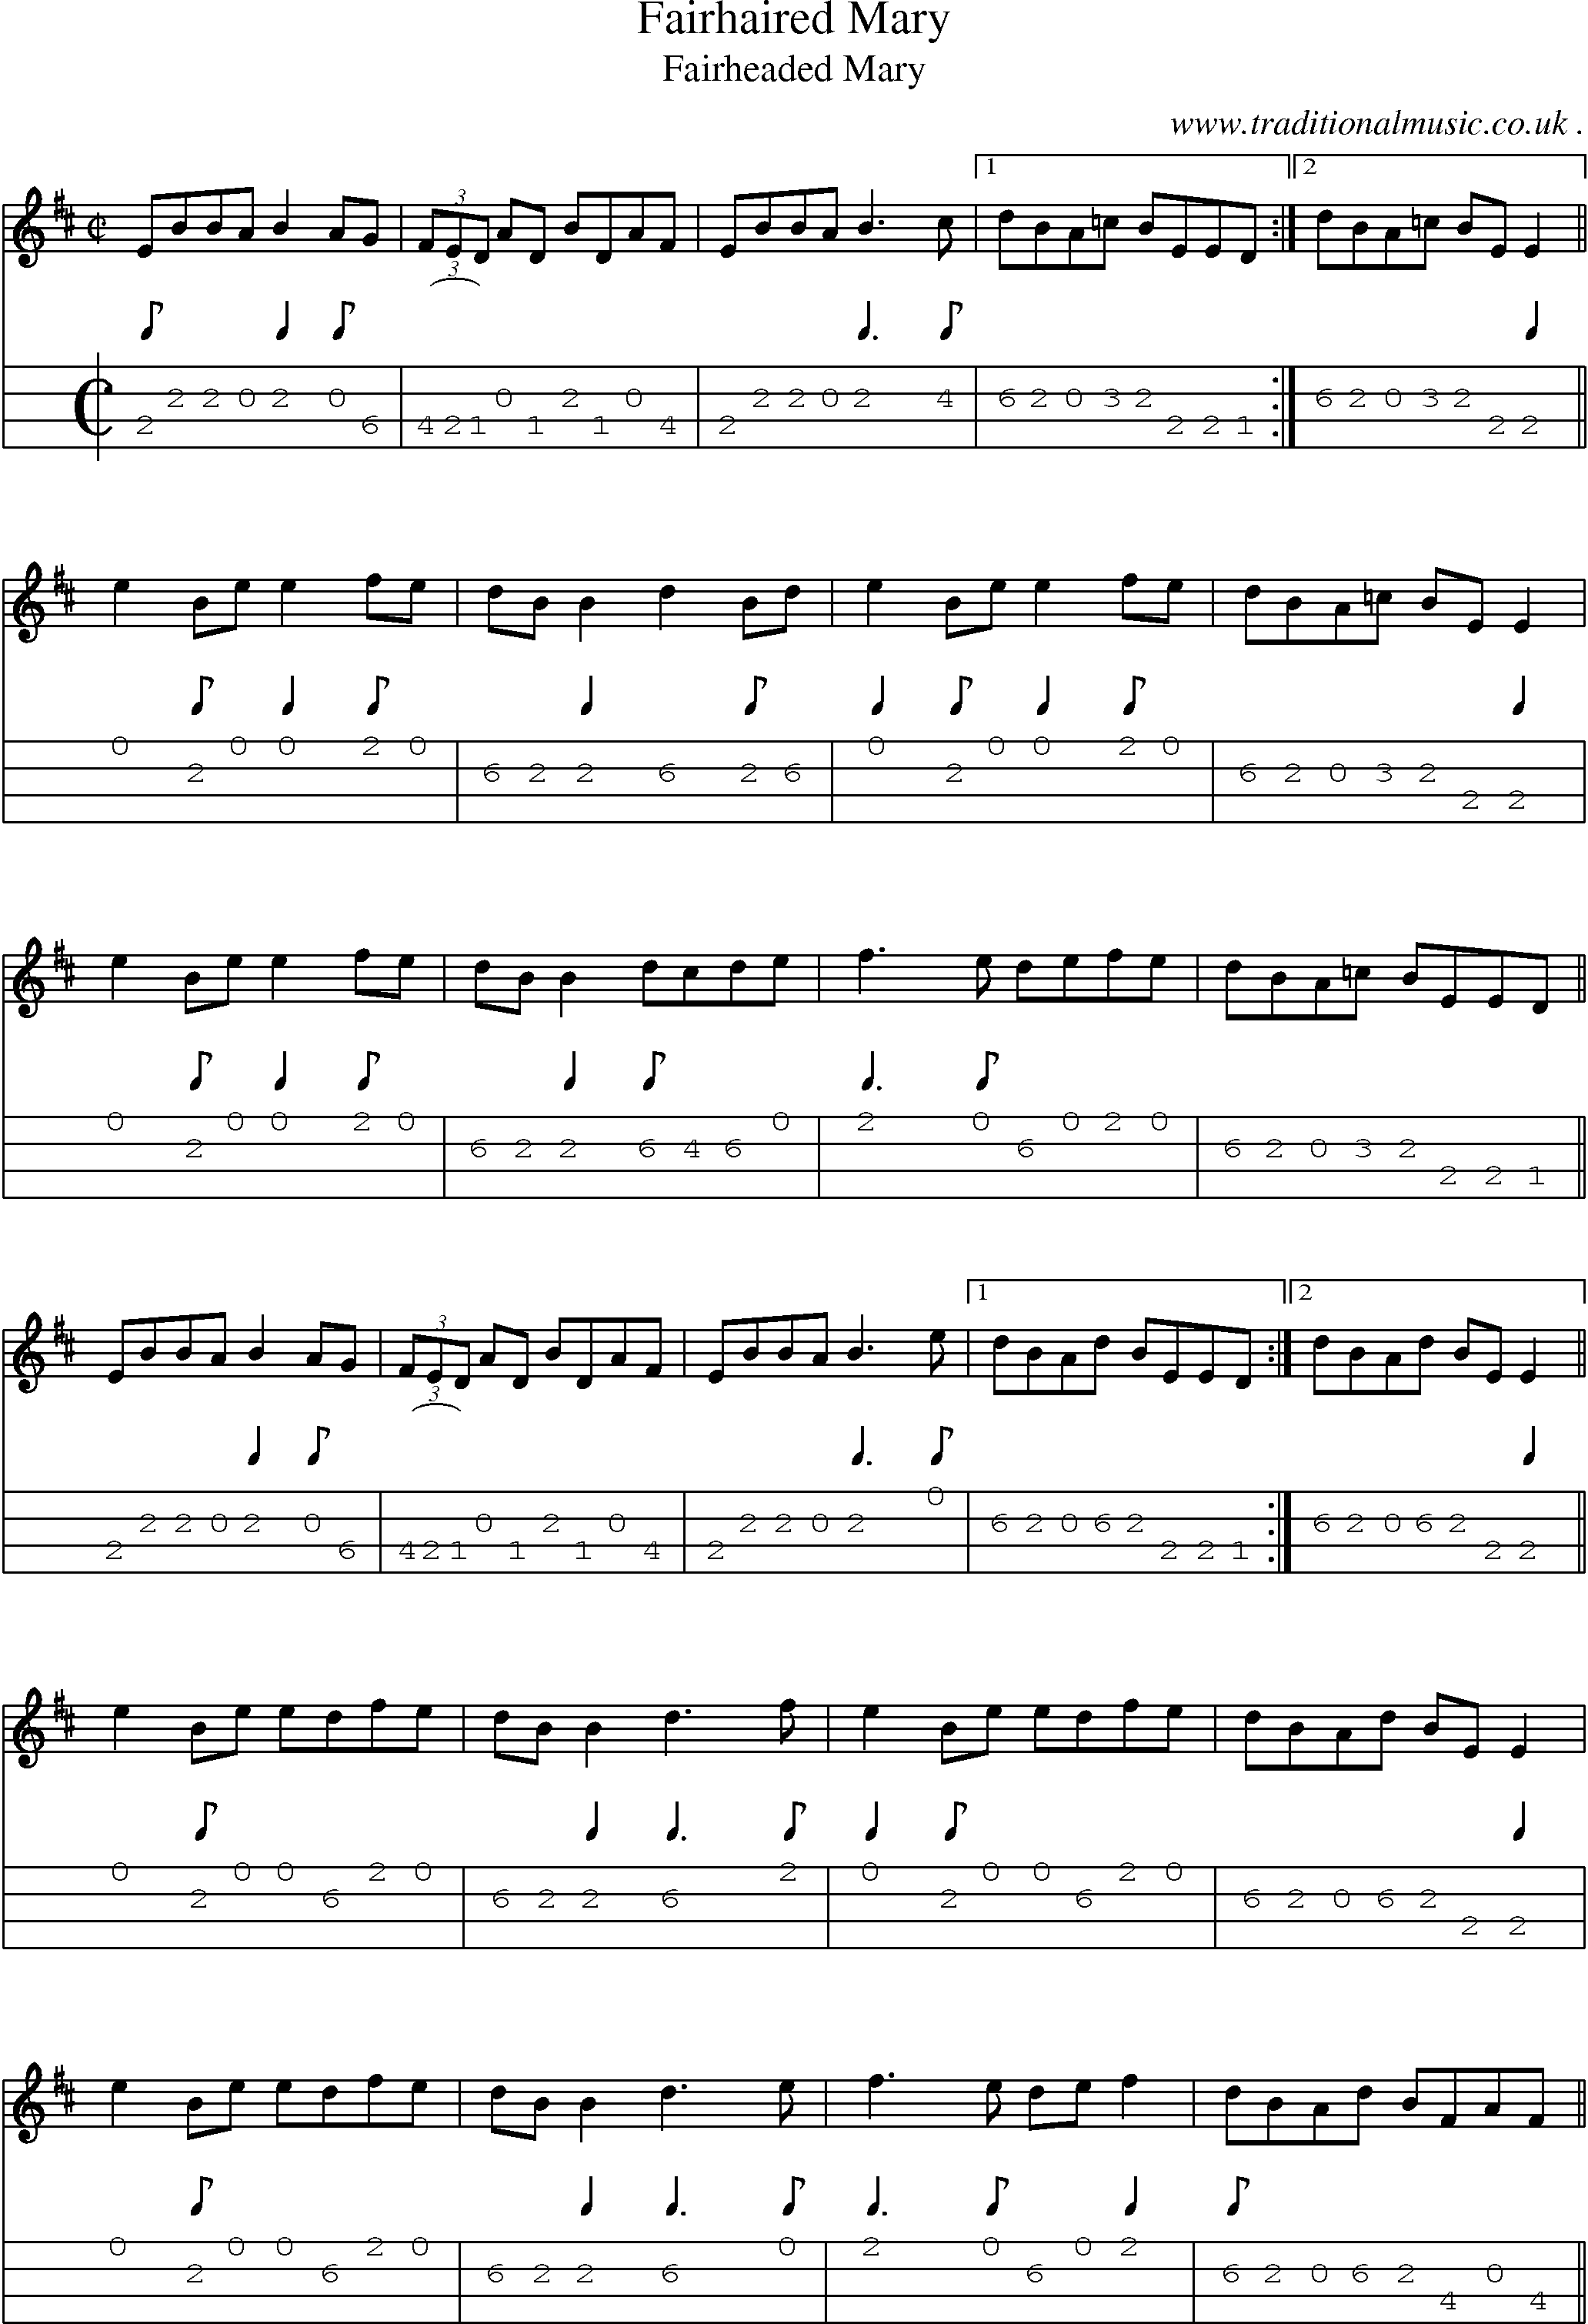 Sheet-Music and Mandolin Tabs for Fairhaired Mary